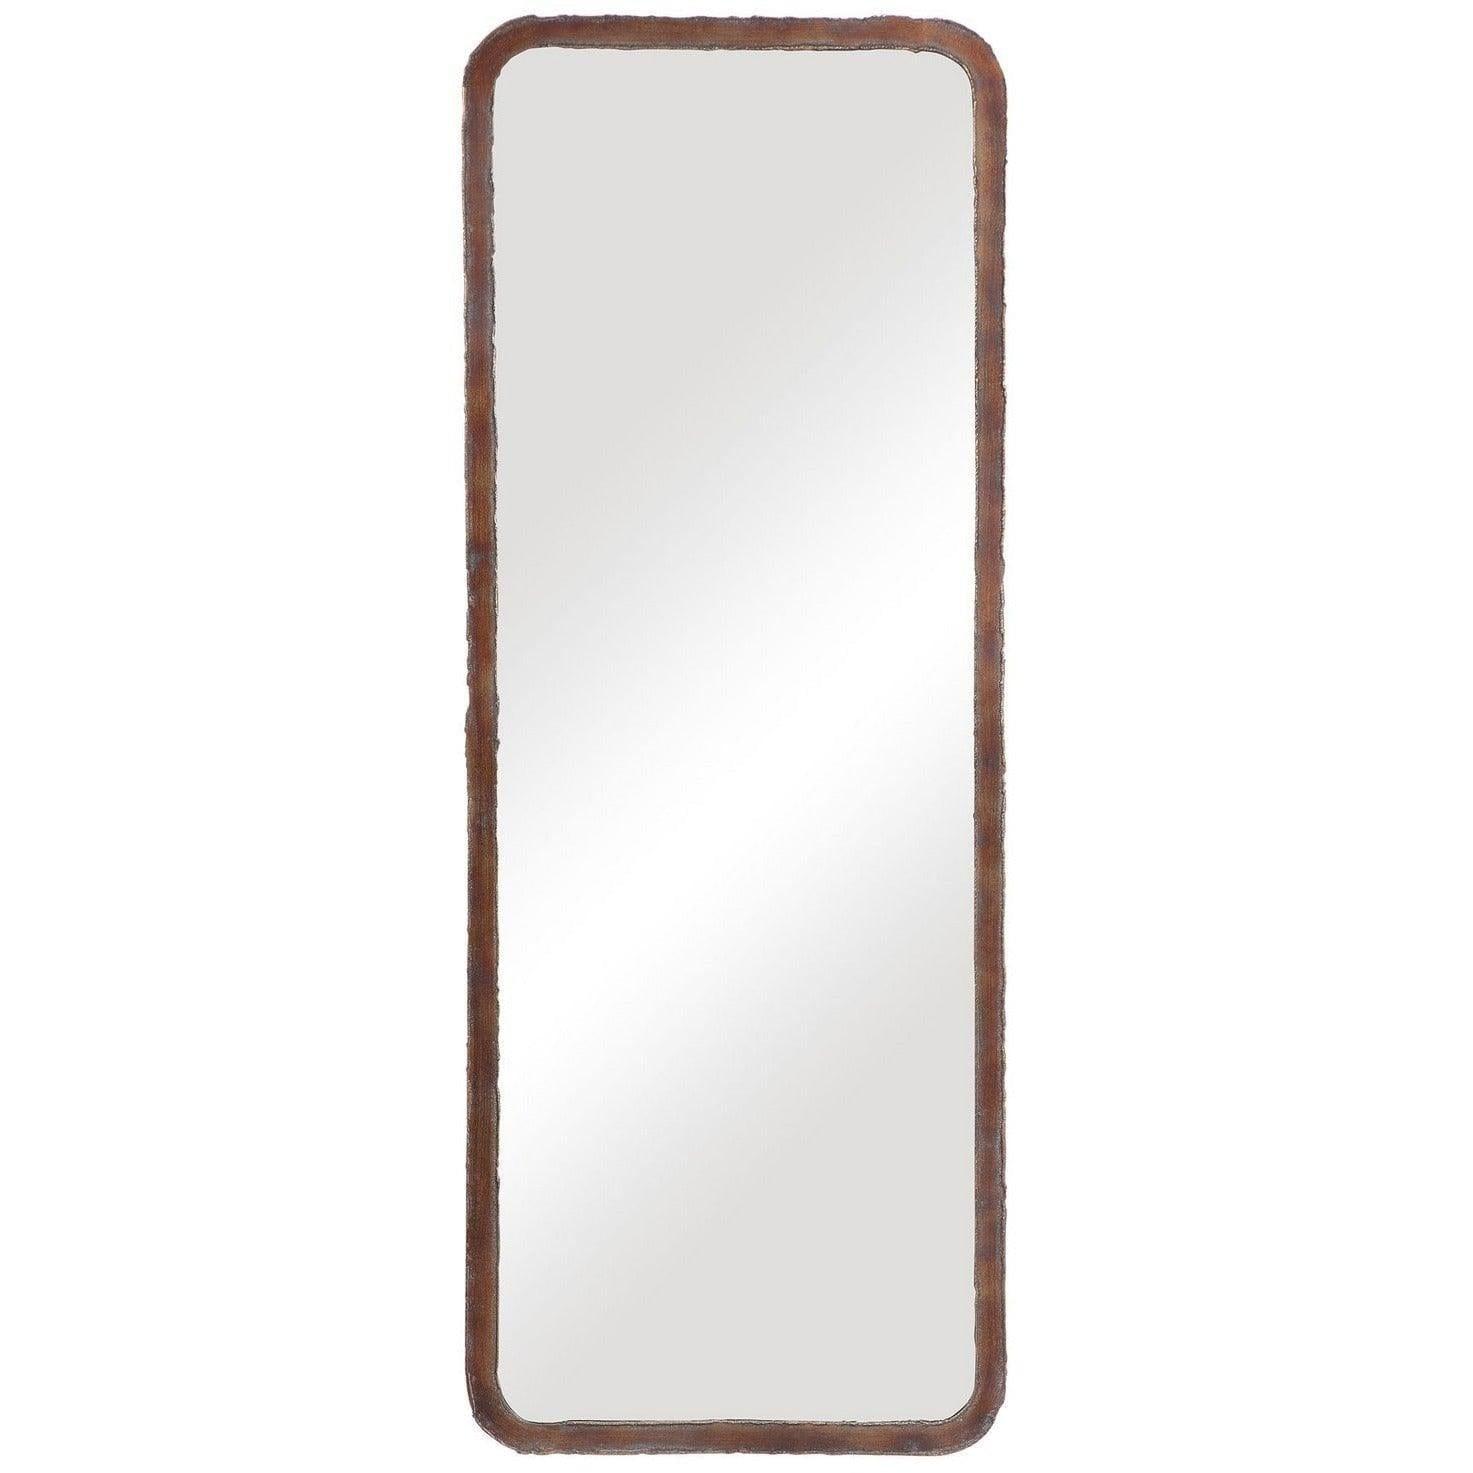 The Uttermost - Gould Mirror - 09606 | Montreal Lighting & Hardware